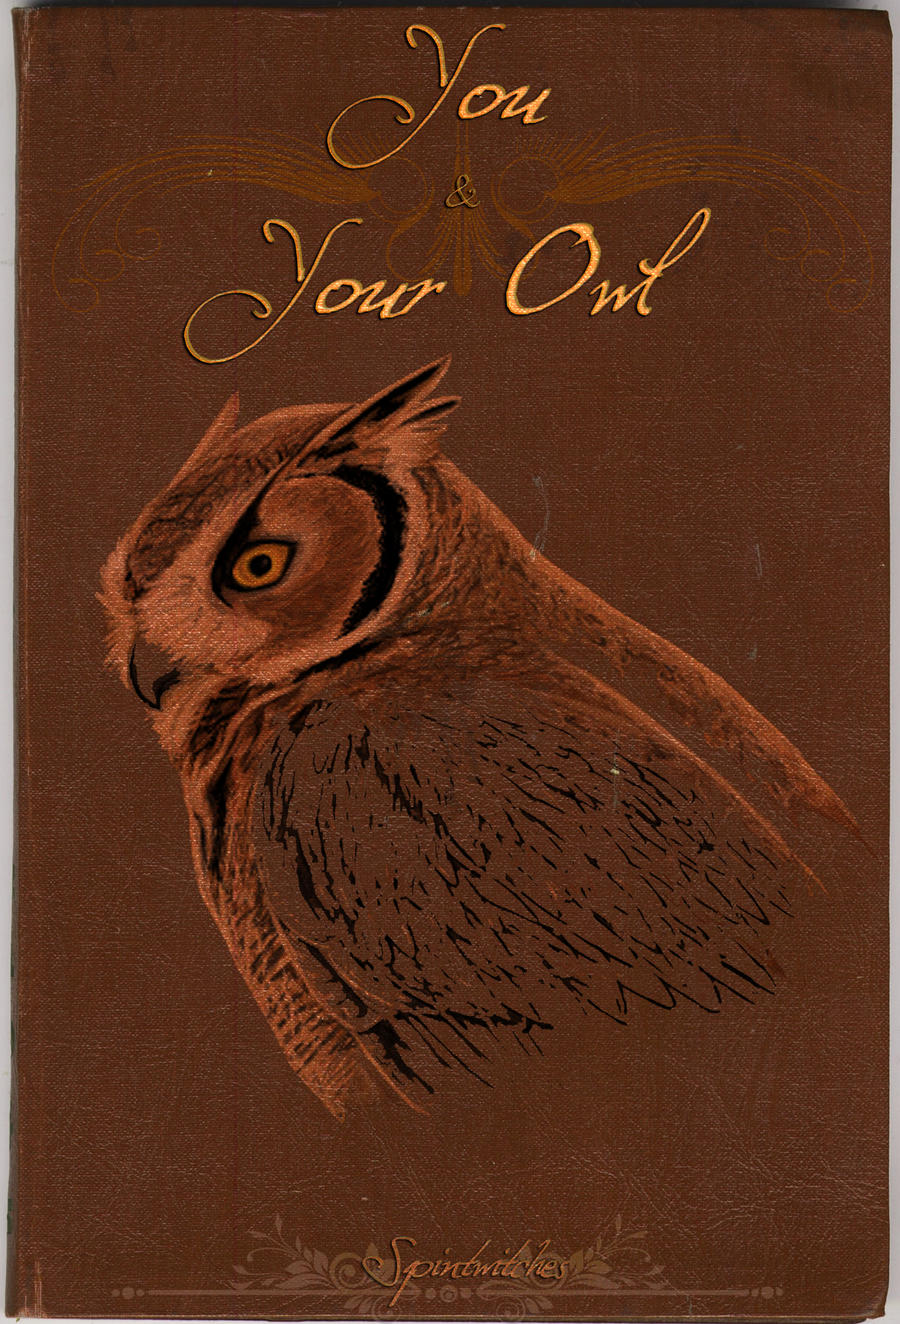 You and Your Owl